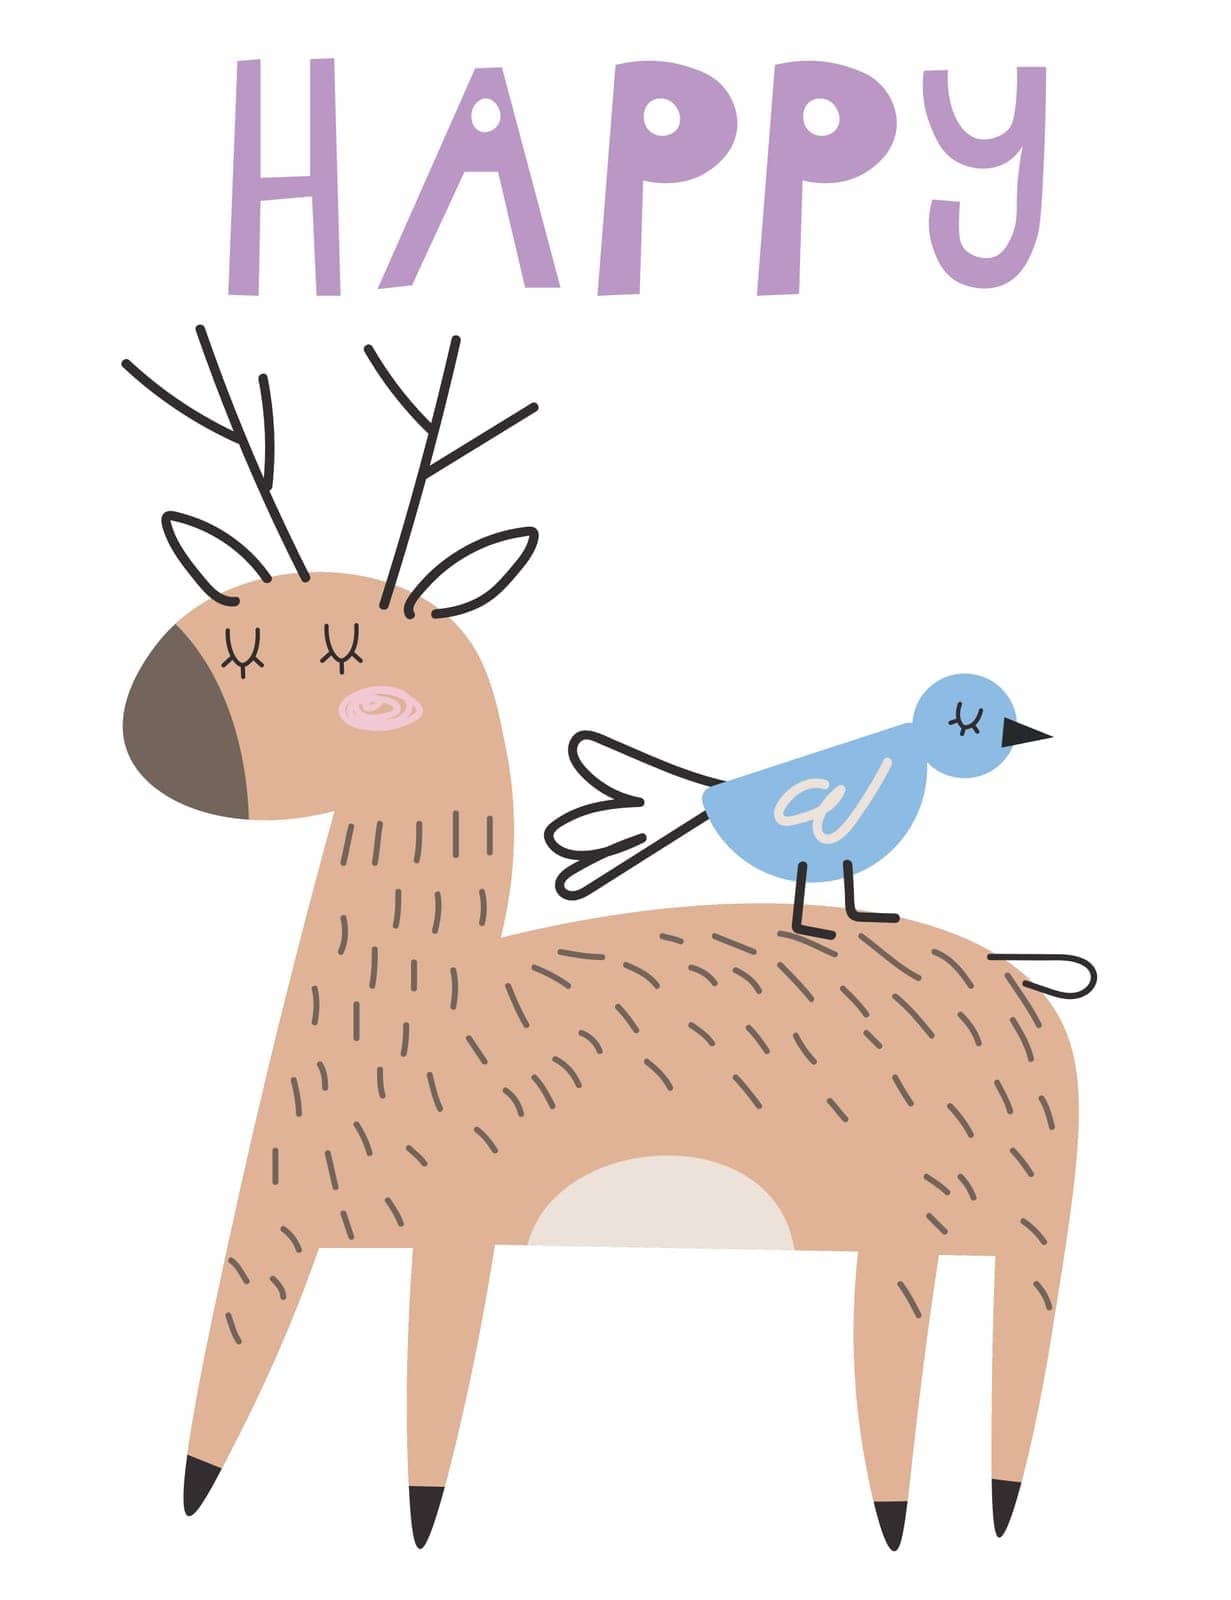 Cute deer with bird hand drawn animal illustration on whith background with text Happy Scandinavian cartoon style. For web, posters, invitations, postcards, greeting cards, flyers, etc. EPS by Alxyzt